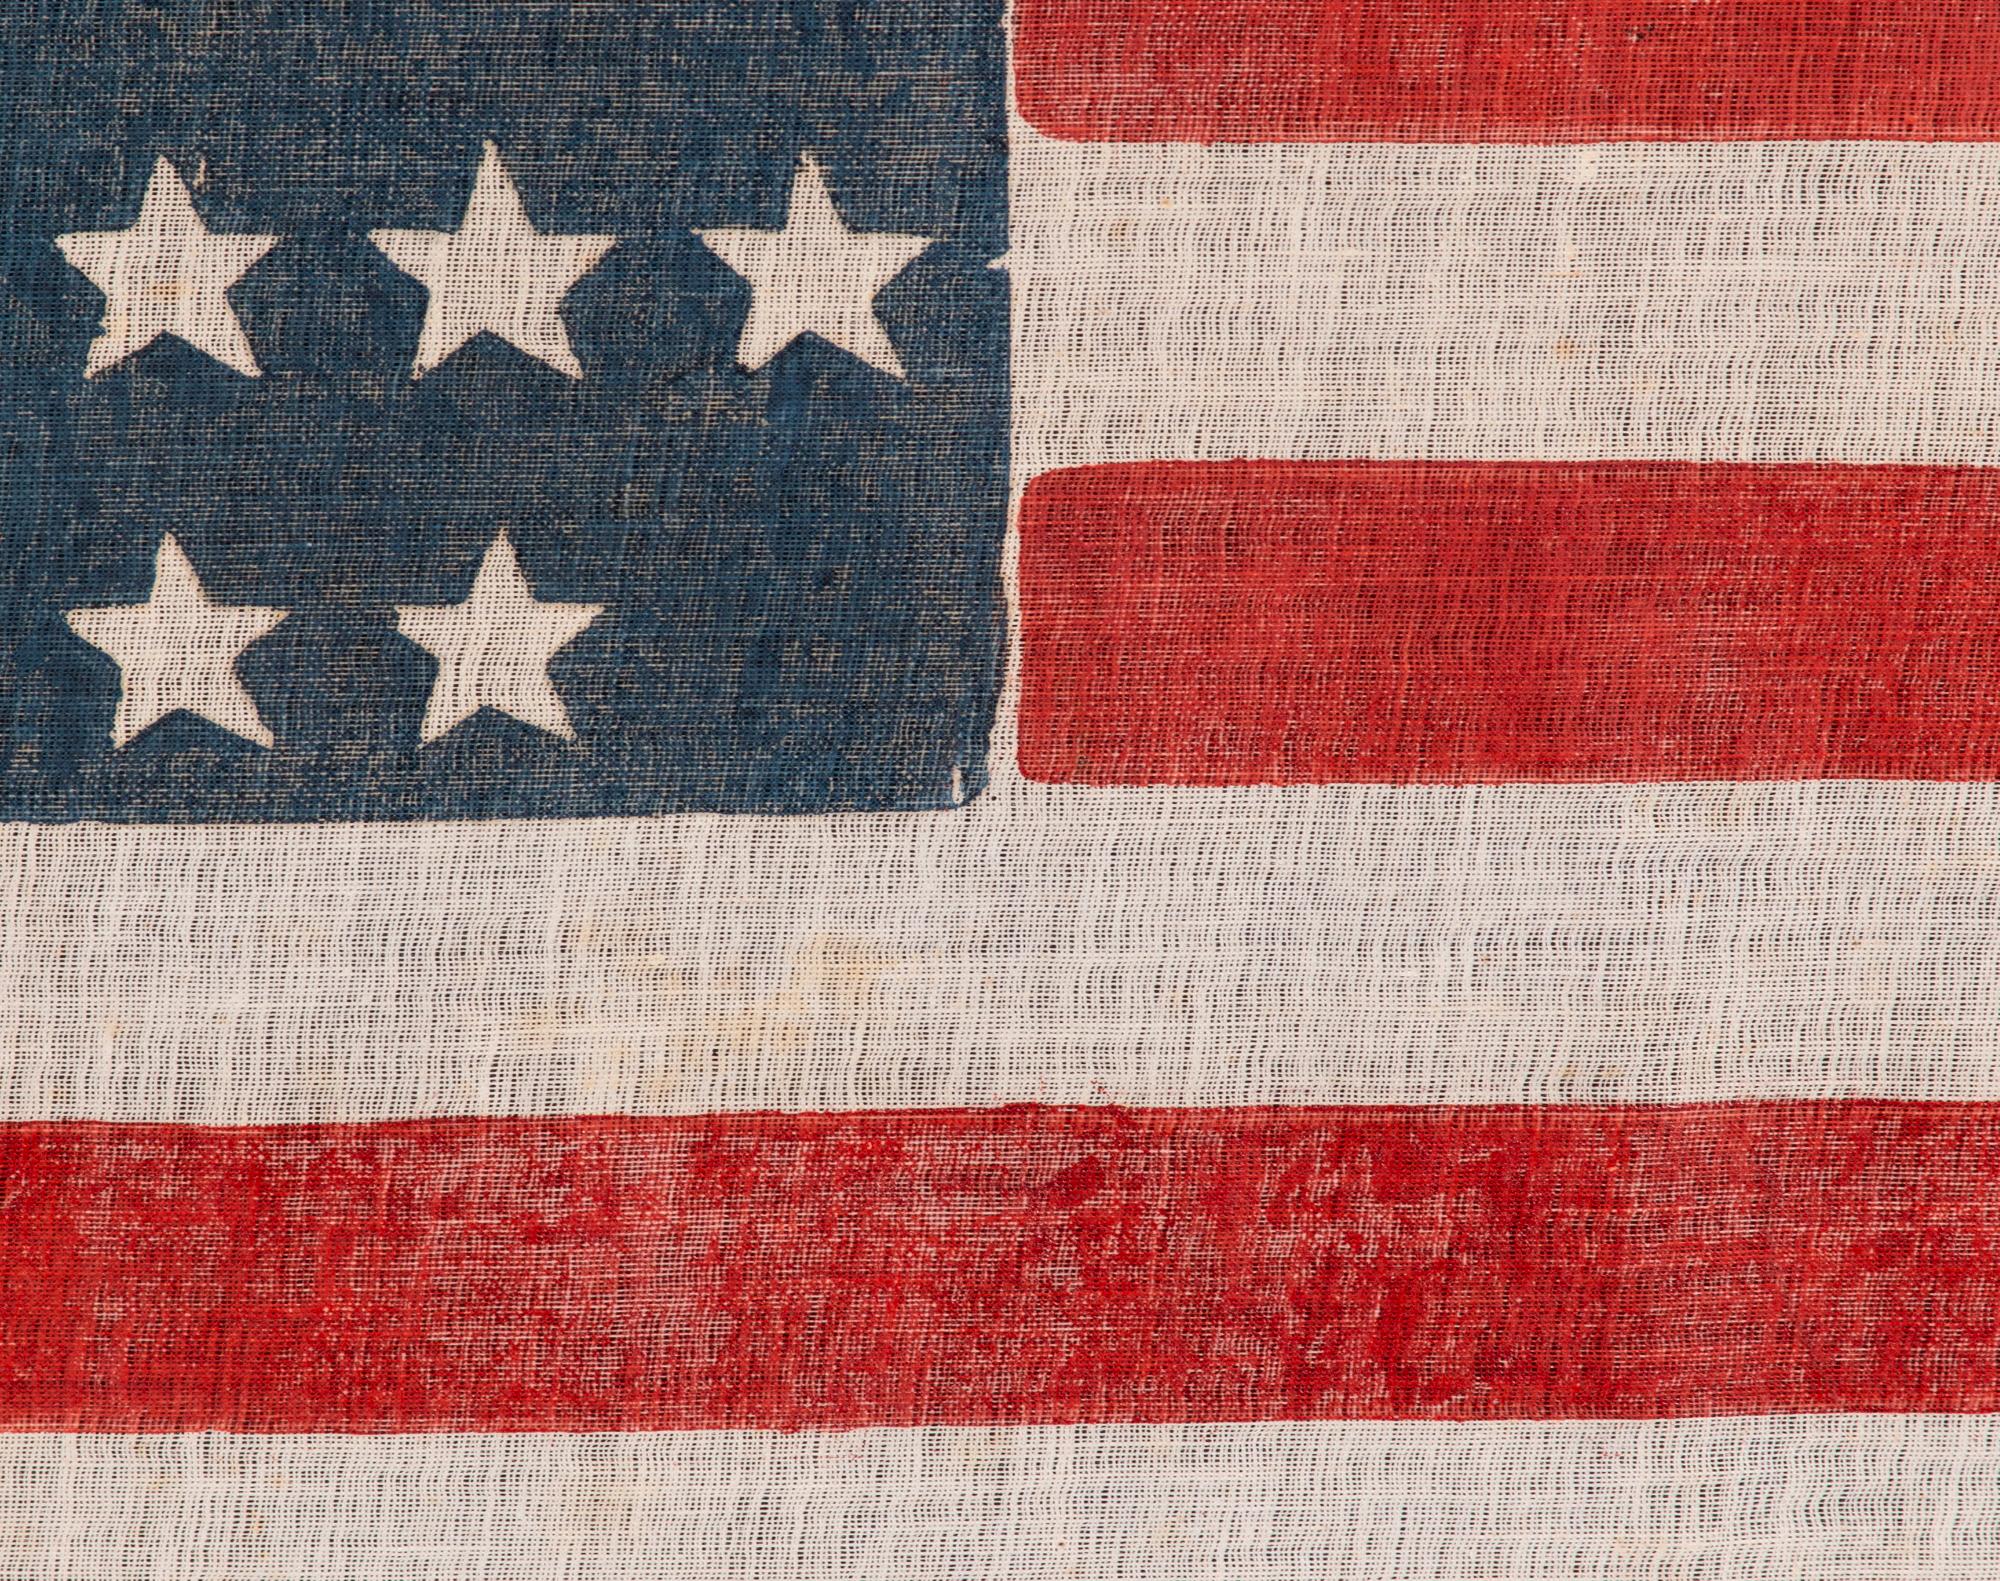 45 Star Antique American Flag, Stars Arranged in a Notched Position, ca 1896 In Good Condition In York County, PA